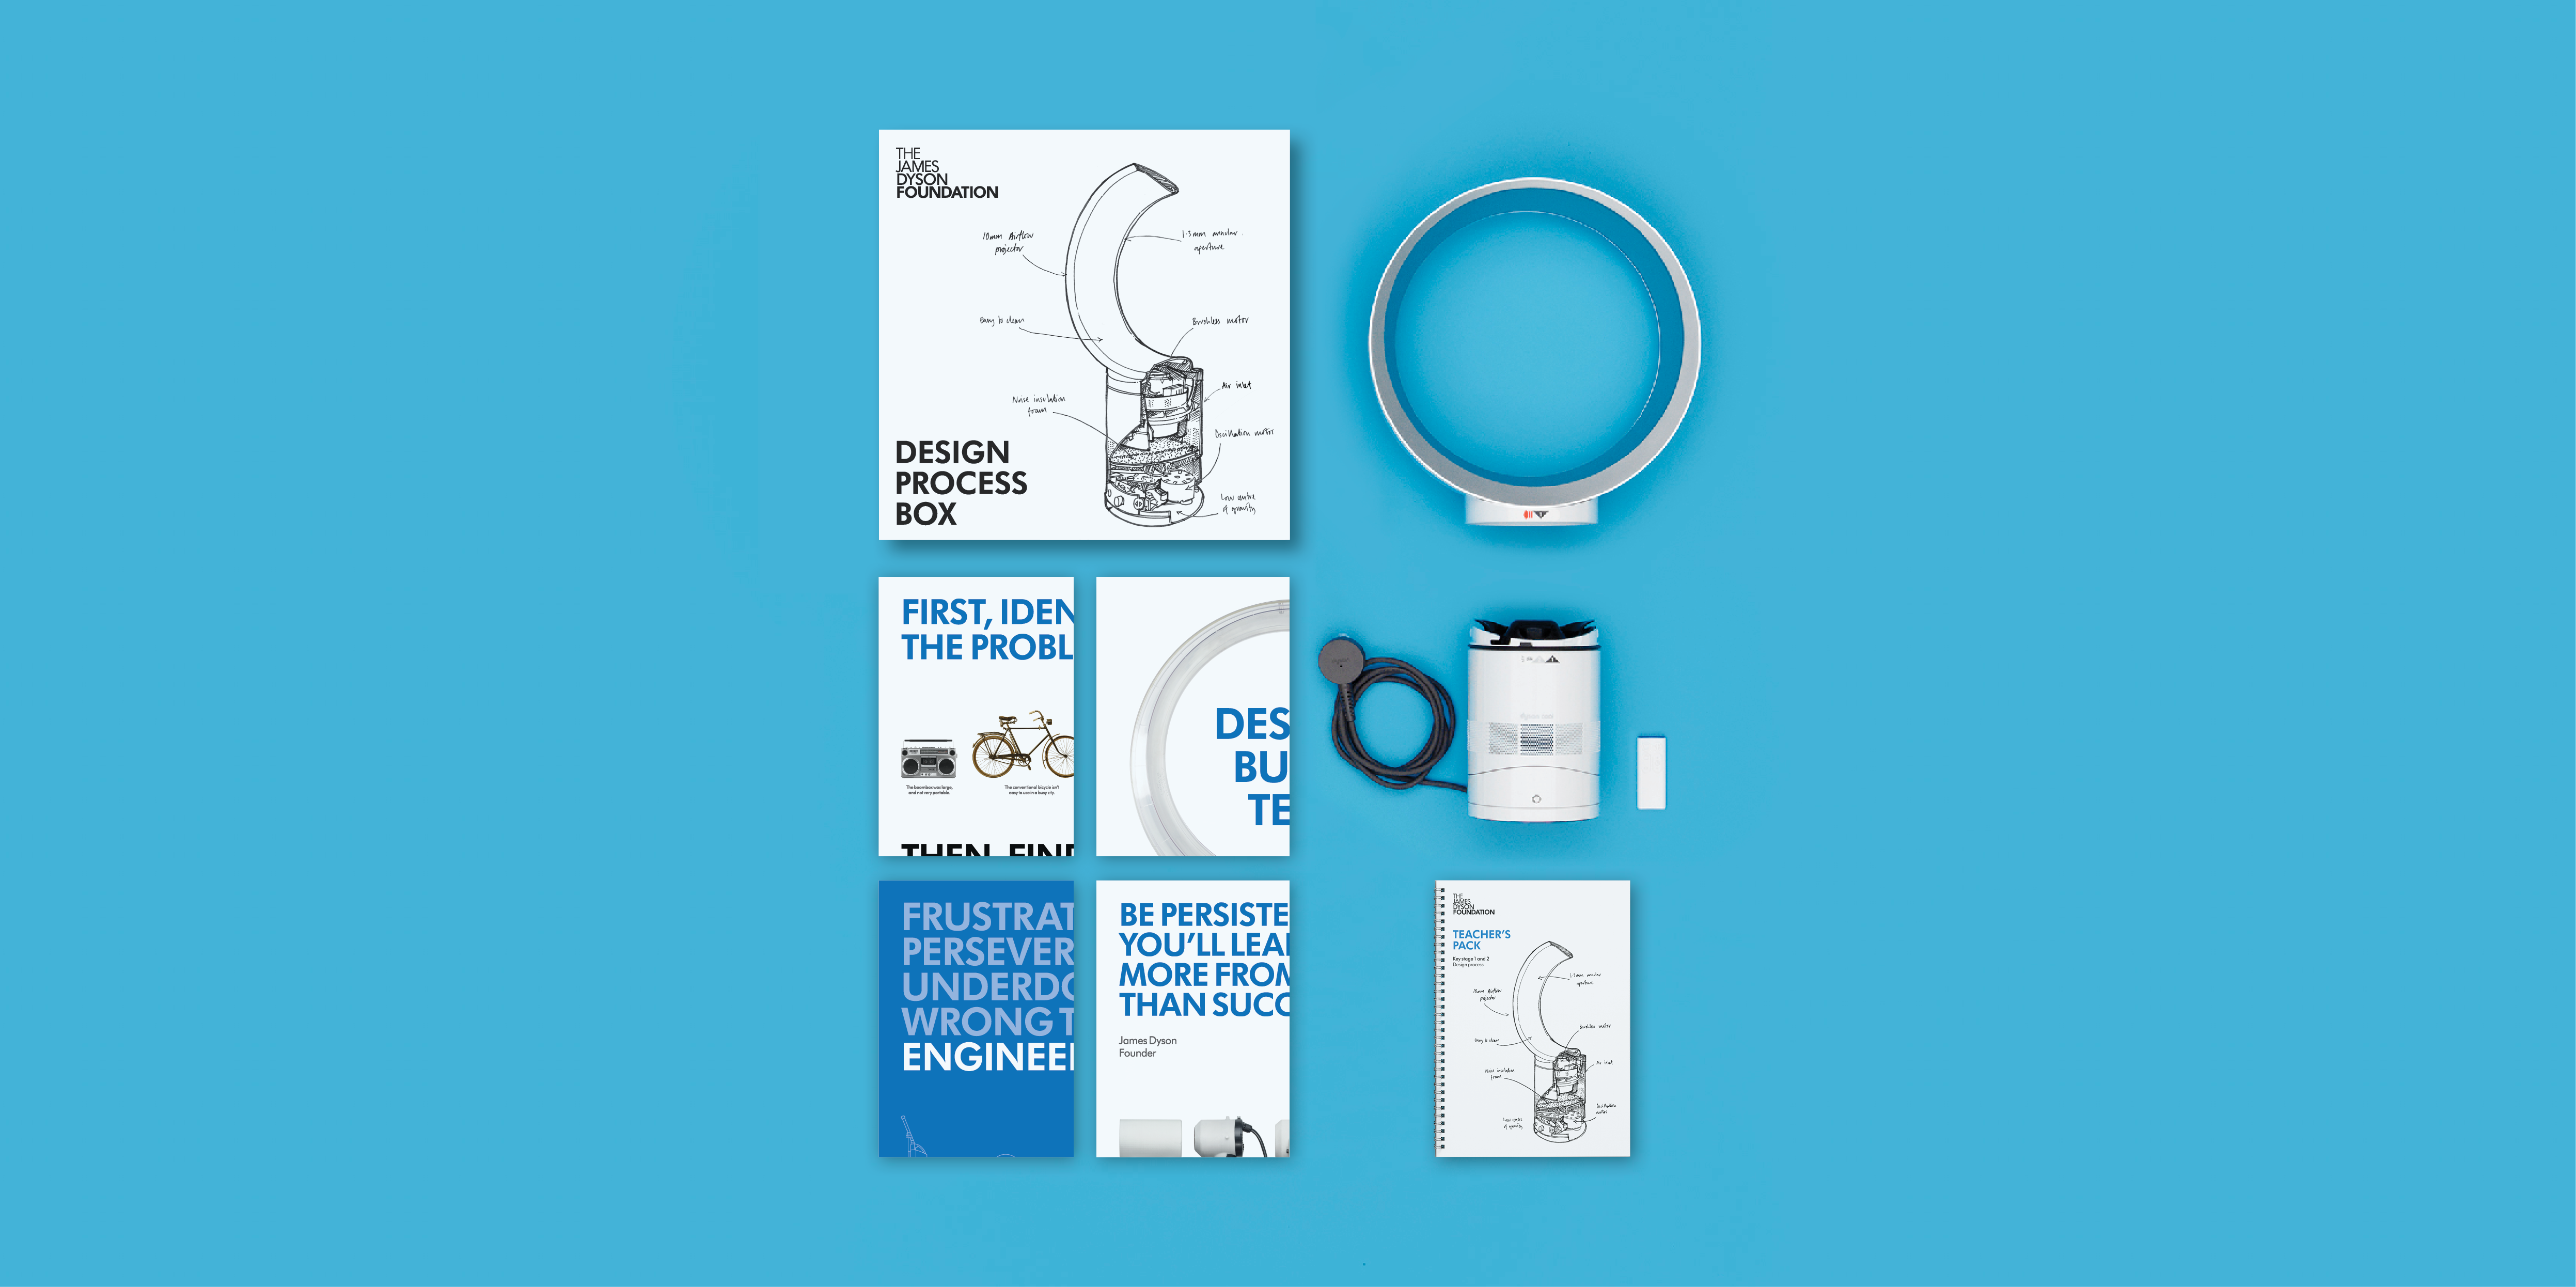 Contents of the Design Process Box including a Dyson Air Multiplier fan, teacher's pack and posters.